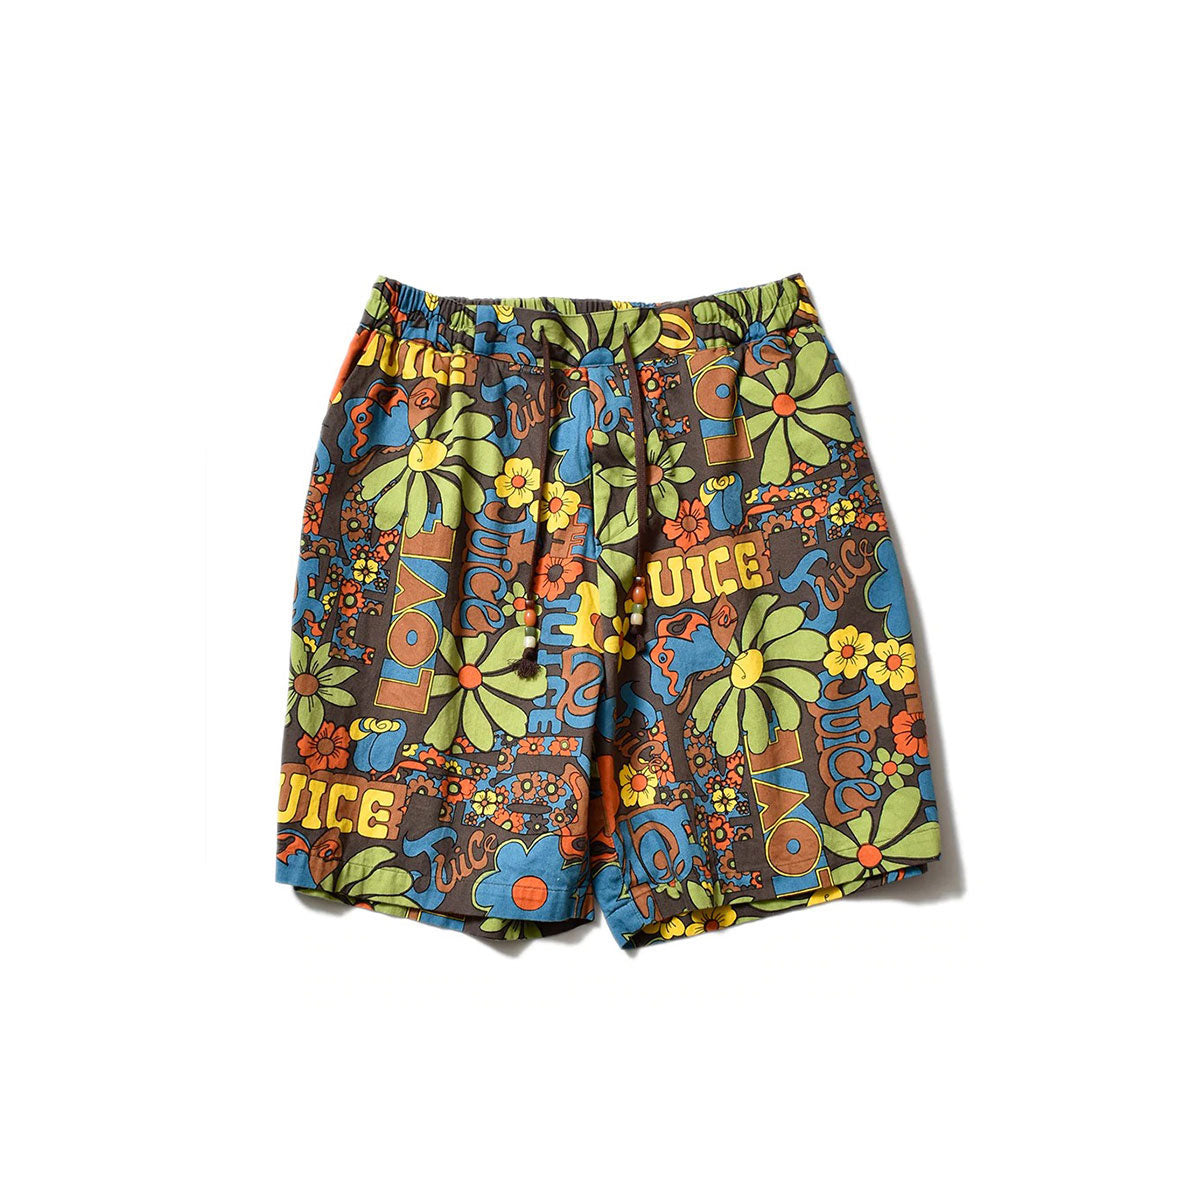 L.Juice Denim Surf Shorts - Why are you here?